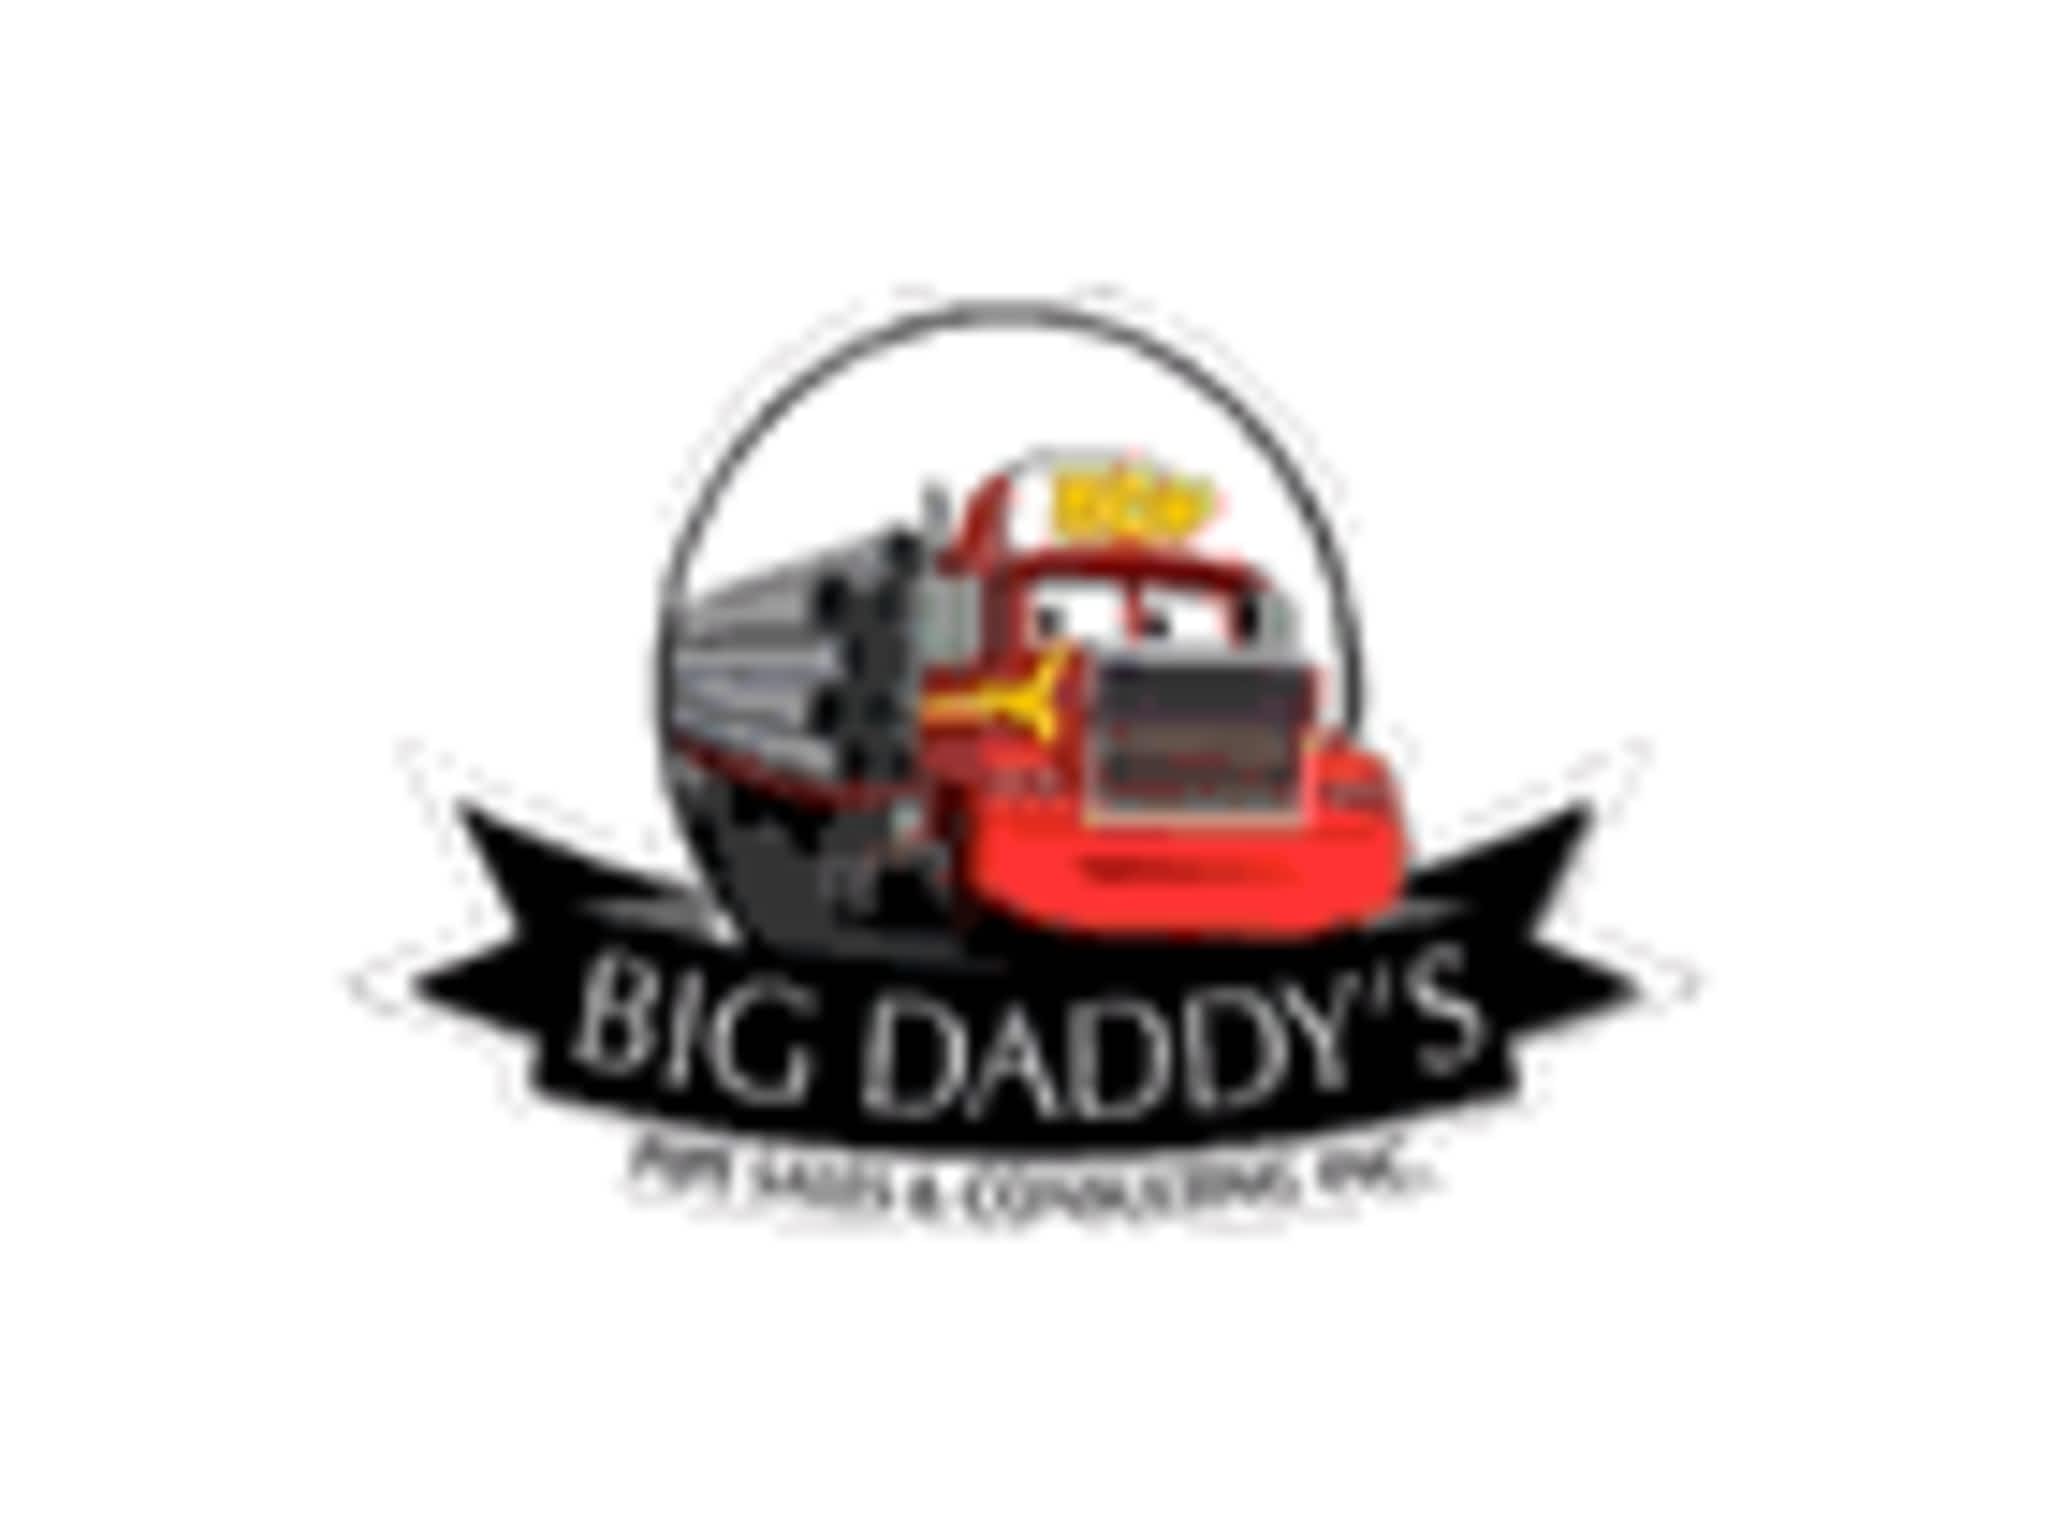 photo Big Daddy's Pipe Sales & Consulting Inc